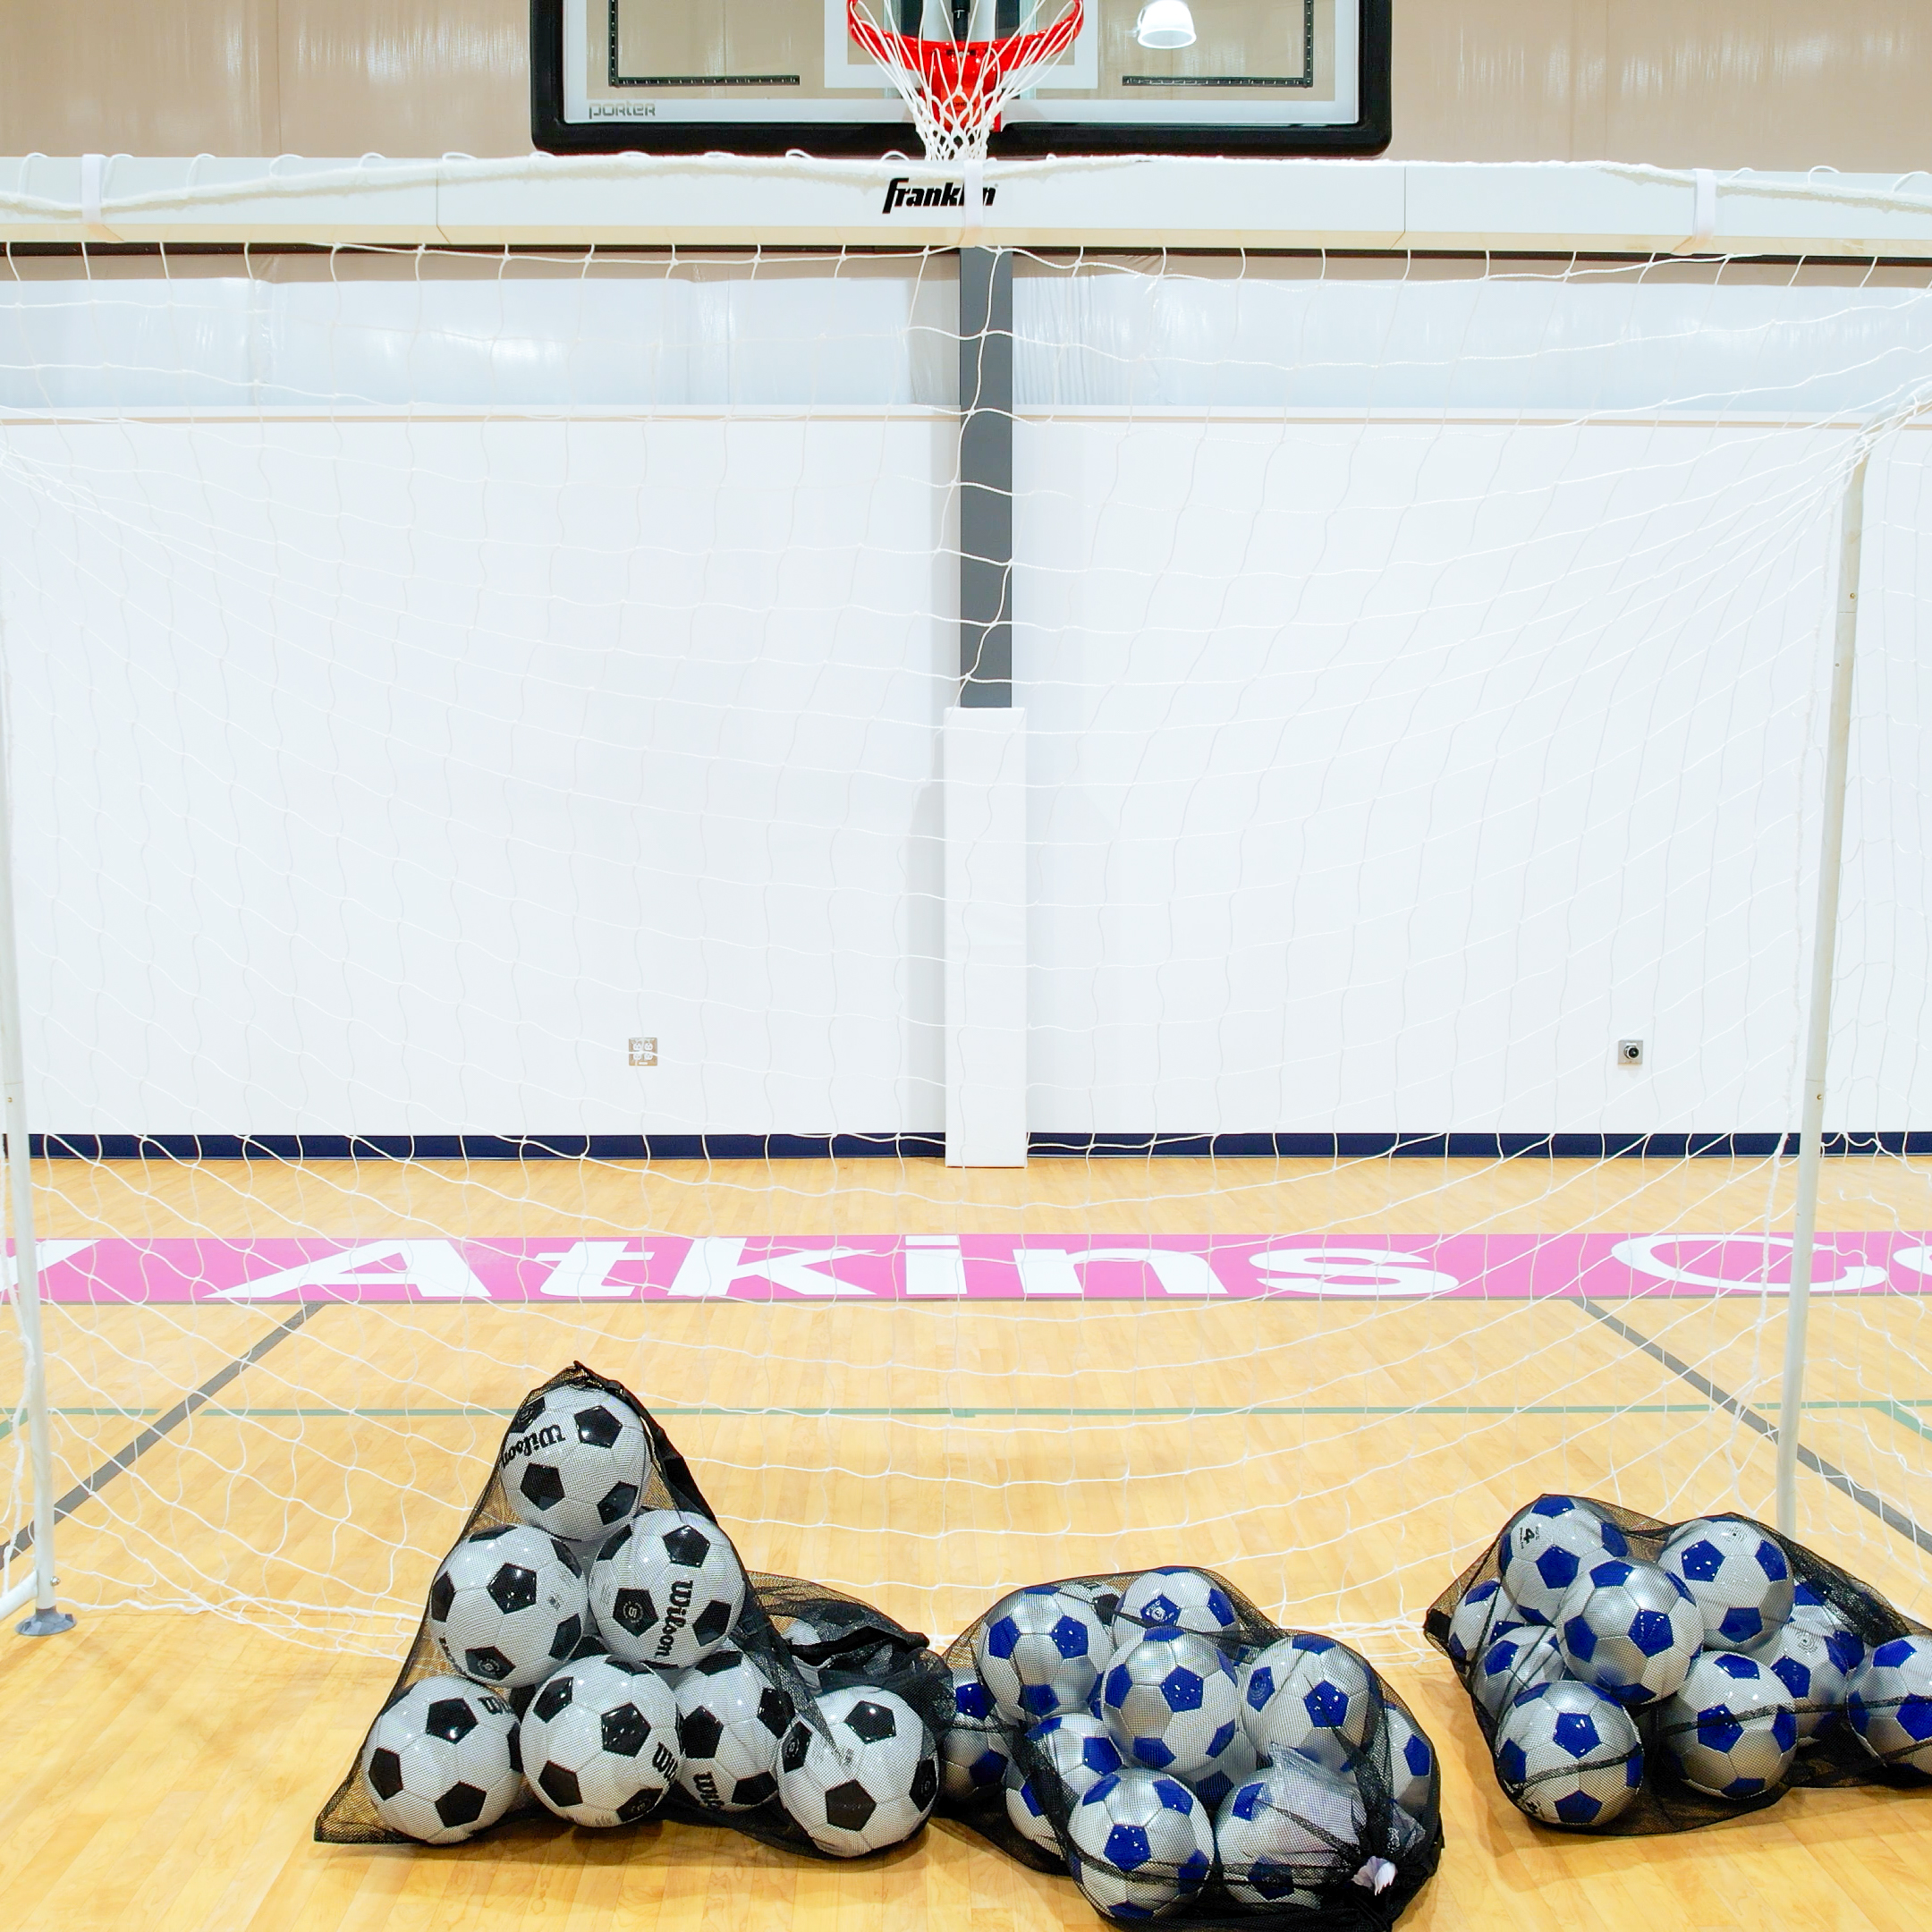 Bud Atkins Court at The Sports Complex at Mylan Park with Futsal balls and goal set up